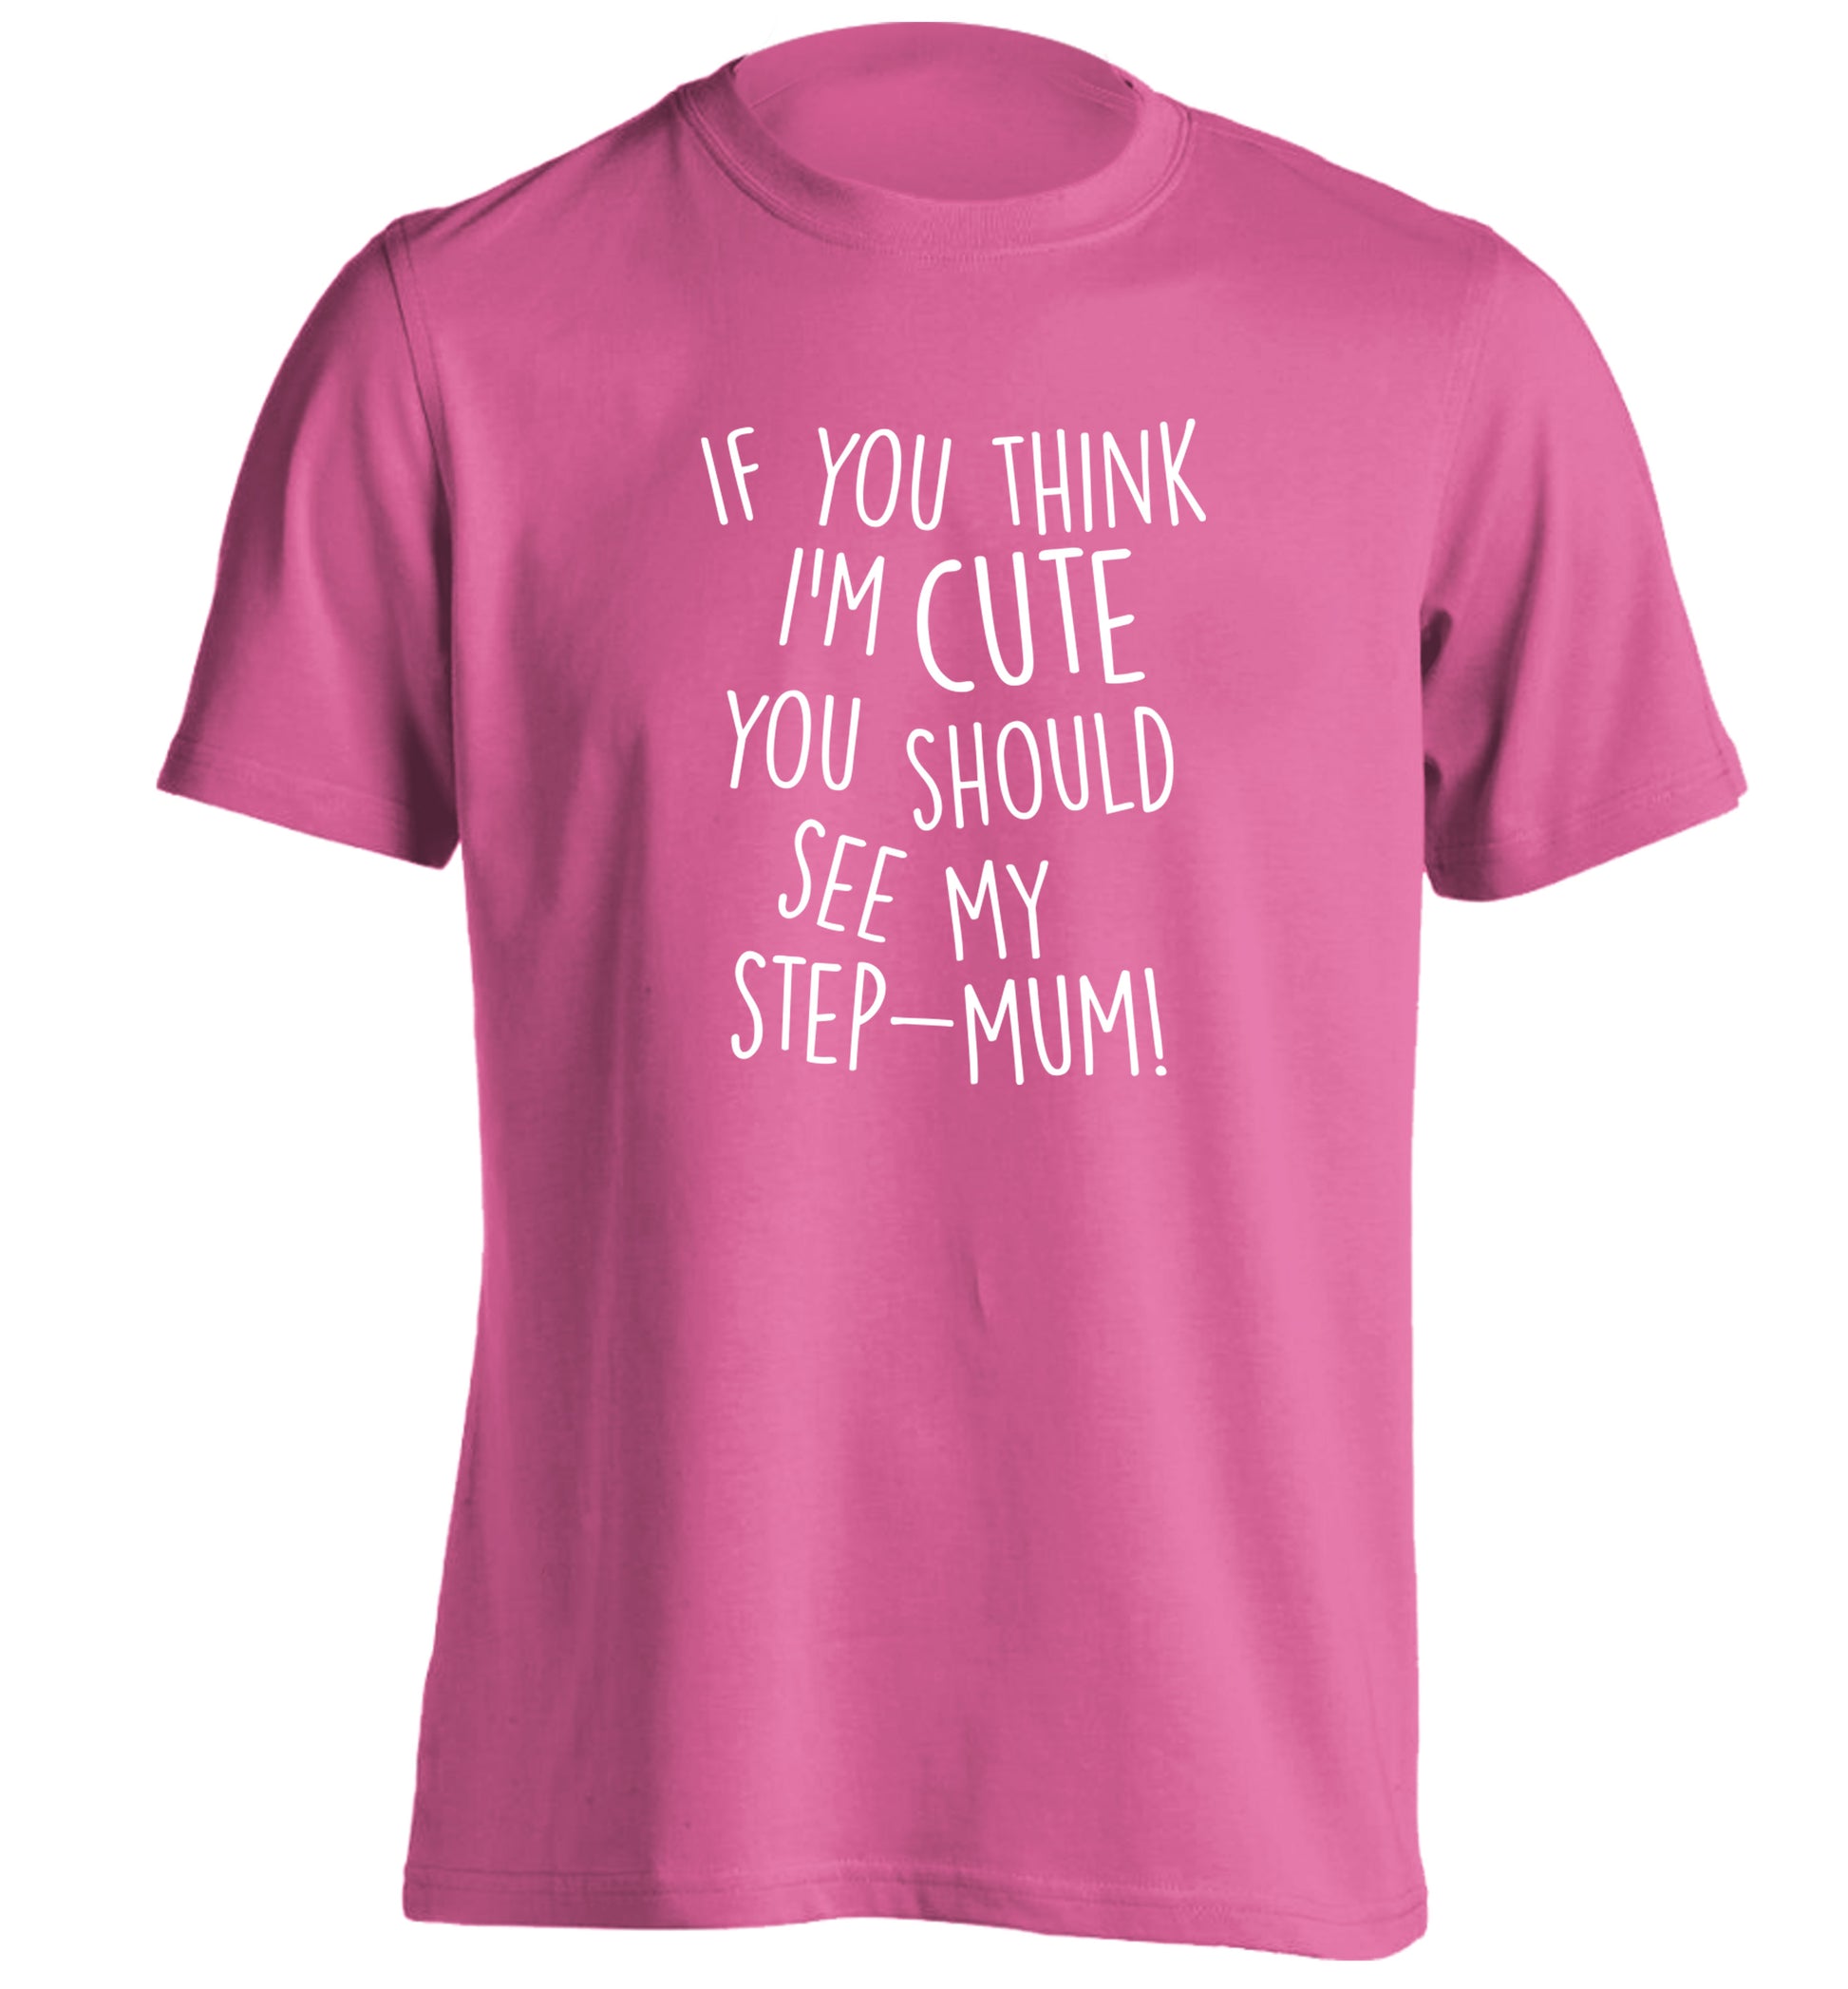 If you think I'm cute you should see my step-mum adults unisex pink Tshirt 2XL